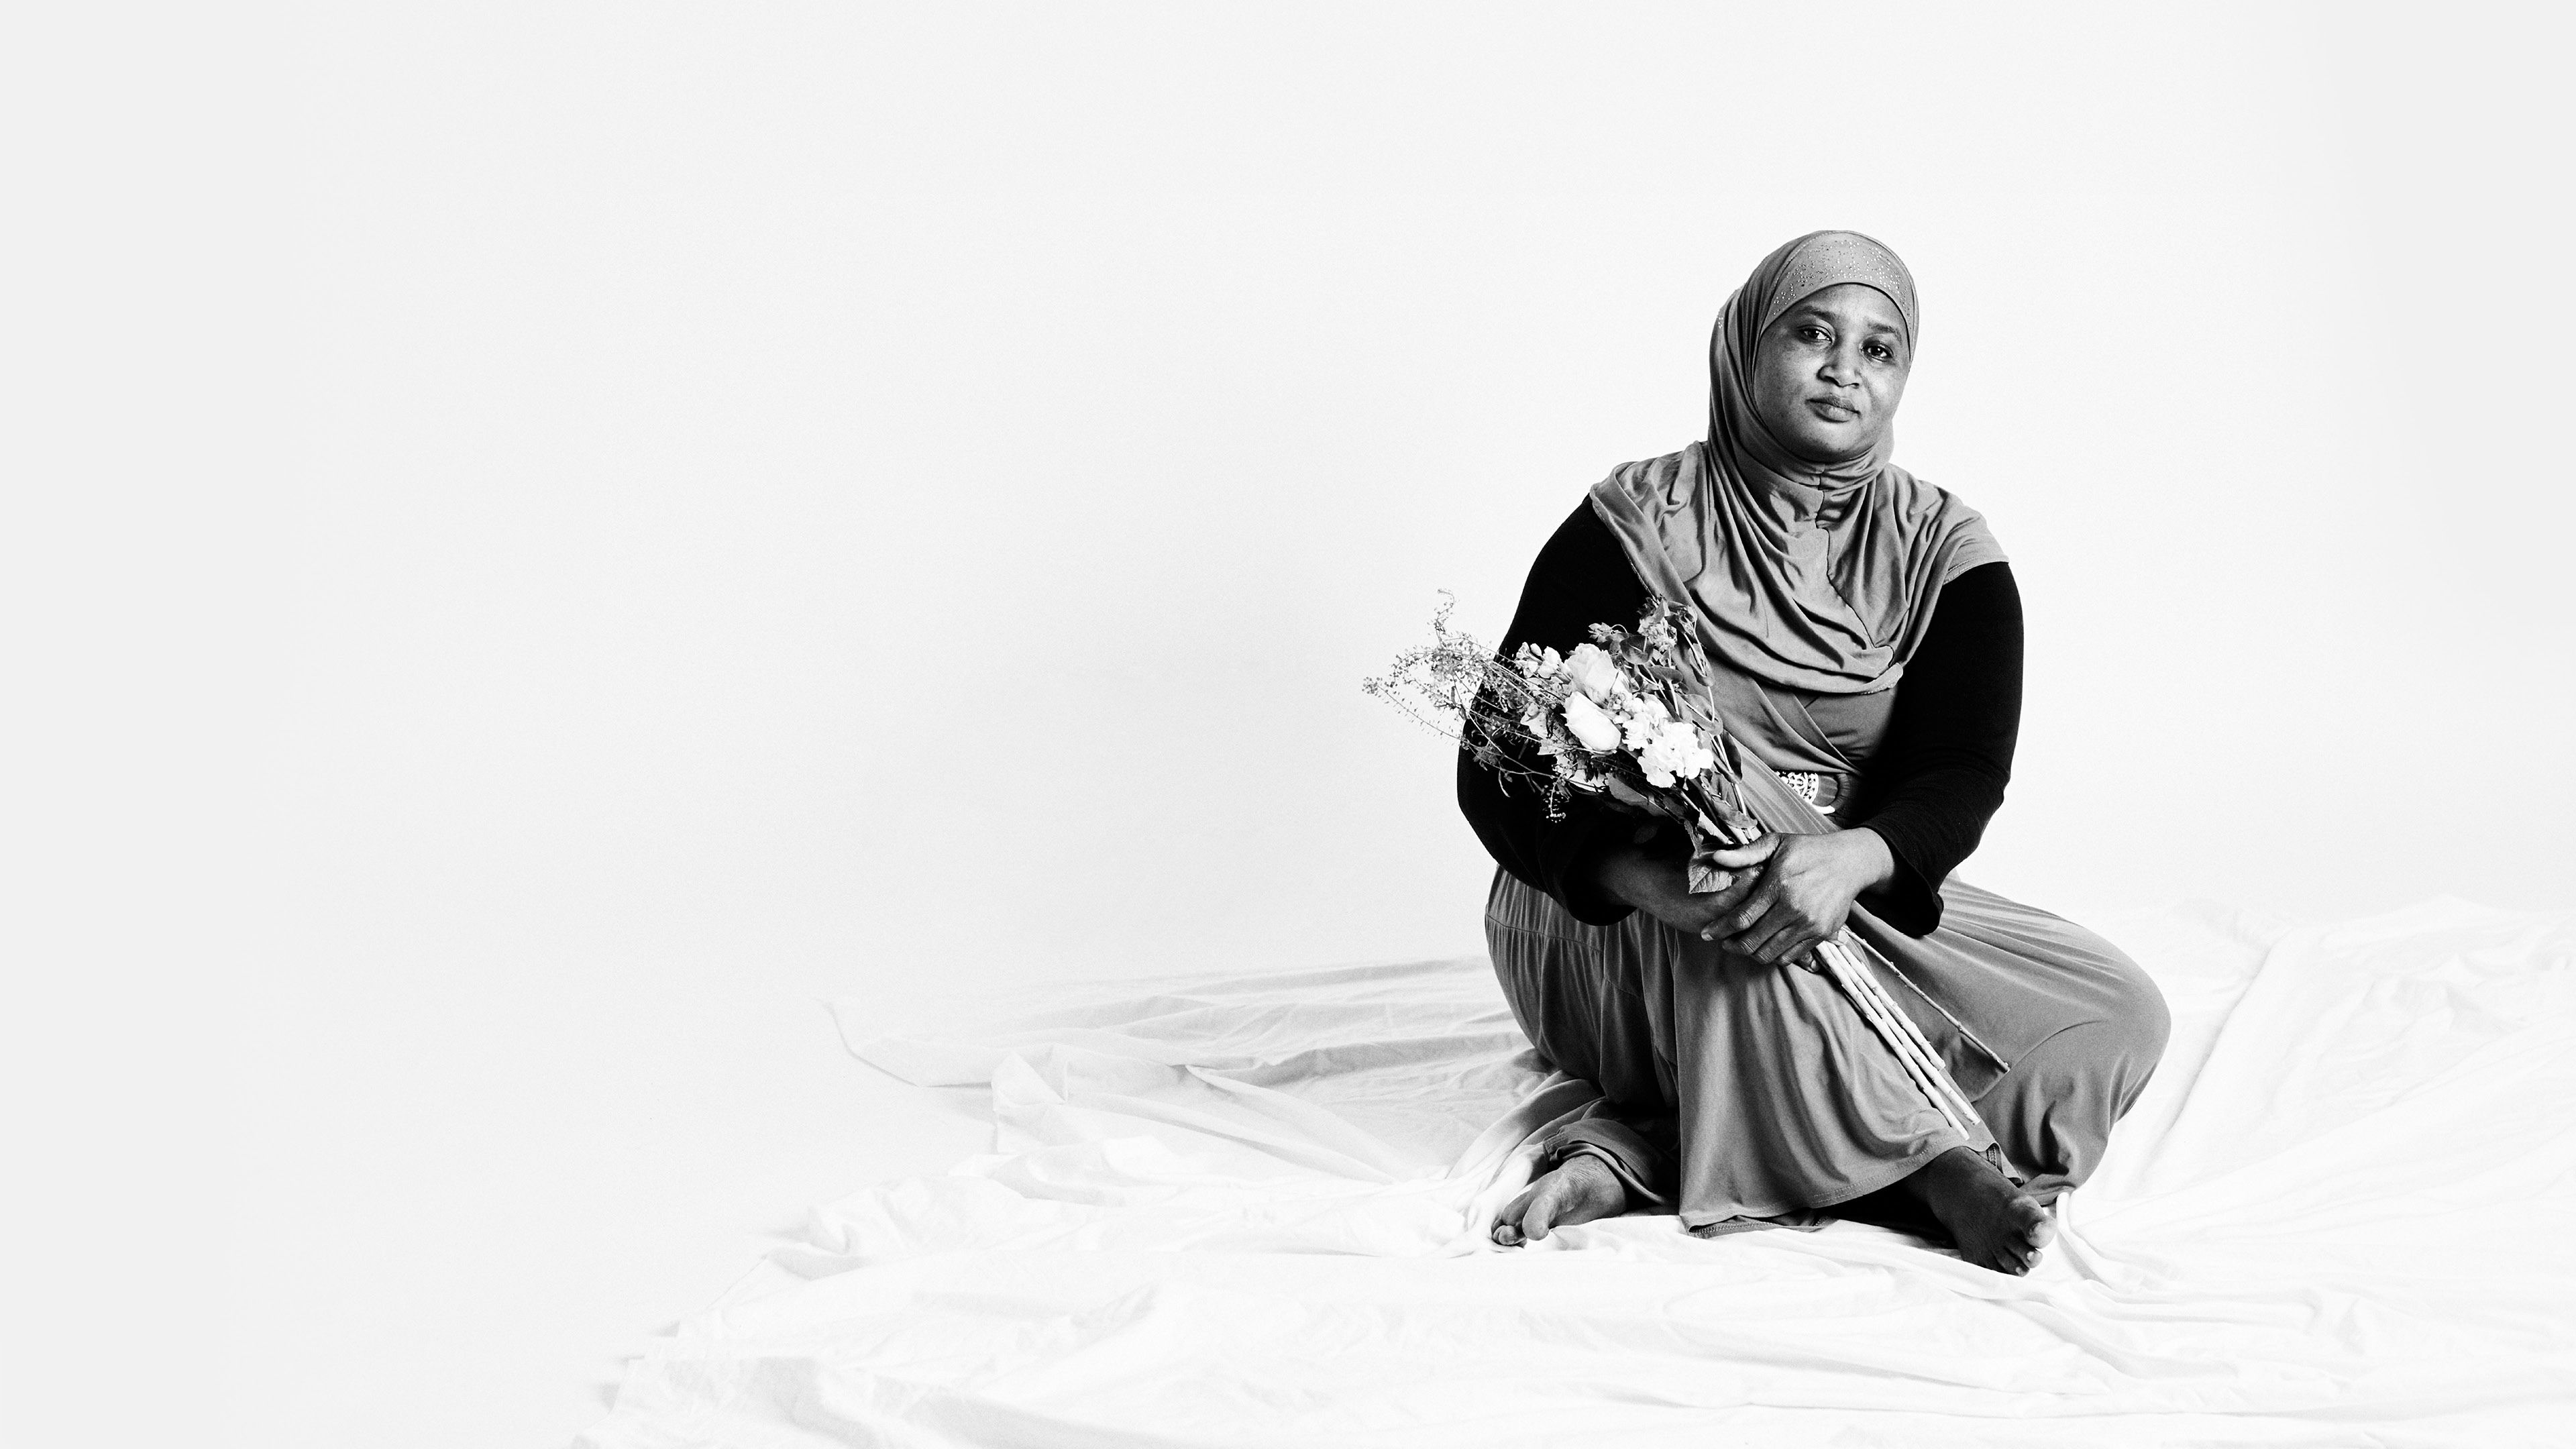 Photo of an FGM survivor looking empowered holding some flowers